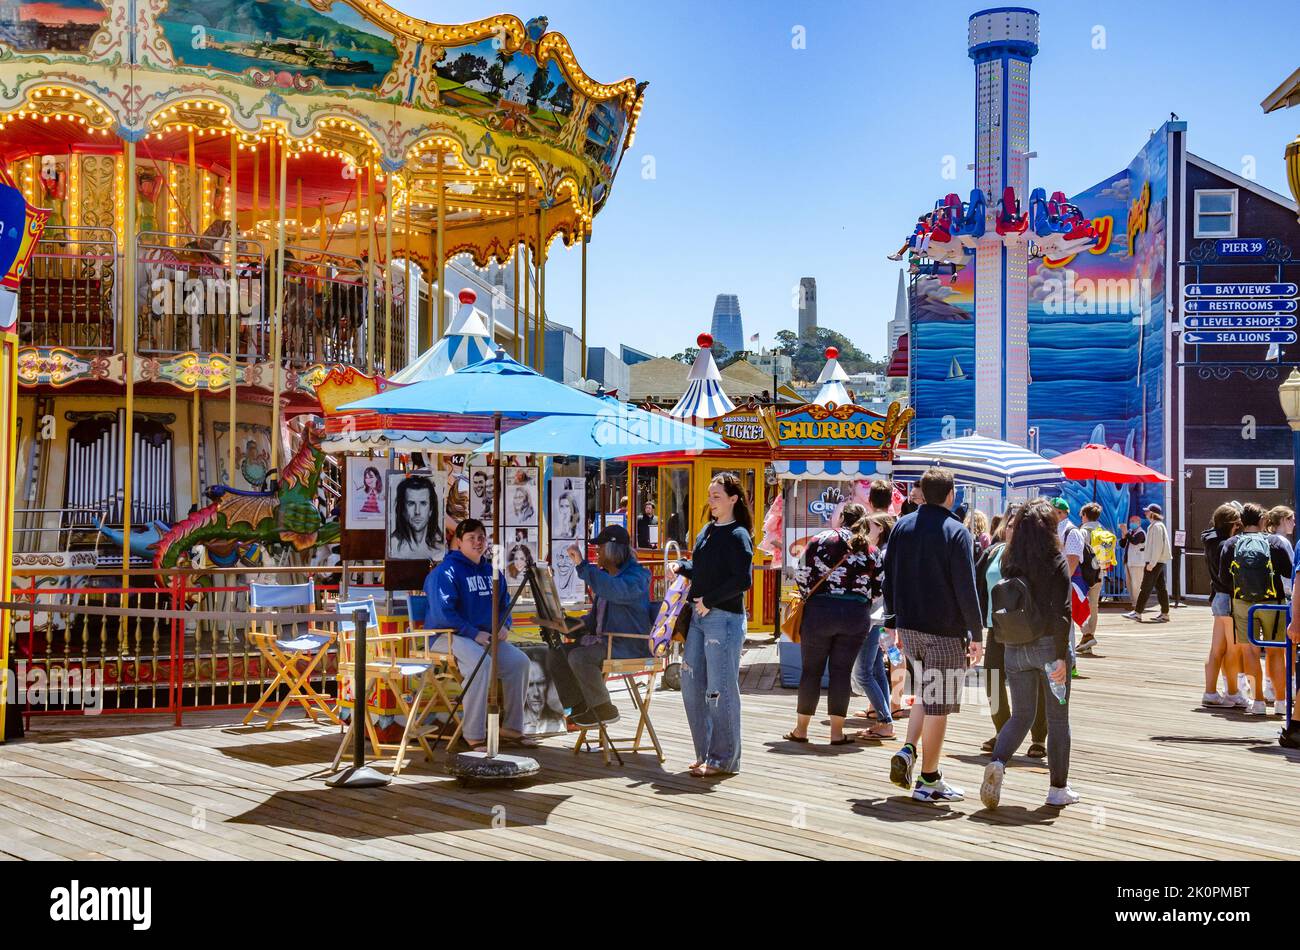 A view of people at Pier 39 with a carousel ride and an artist with a stall drawing caricatures on a summer's day with blue sky in San Francisco. Stock Photo